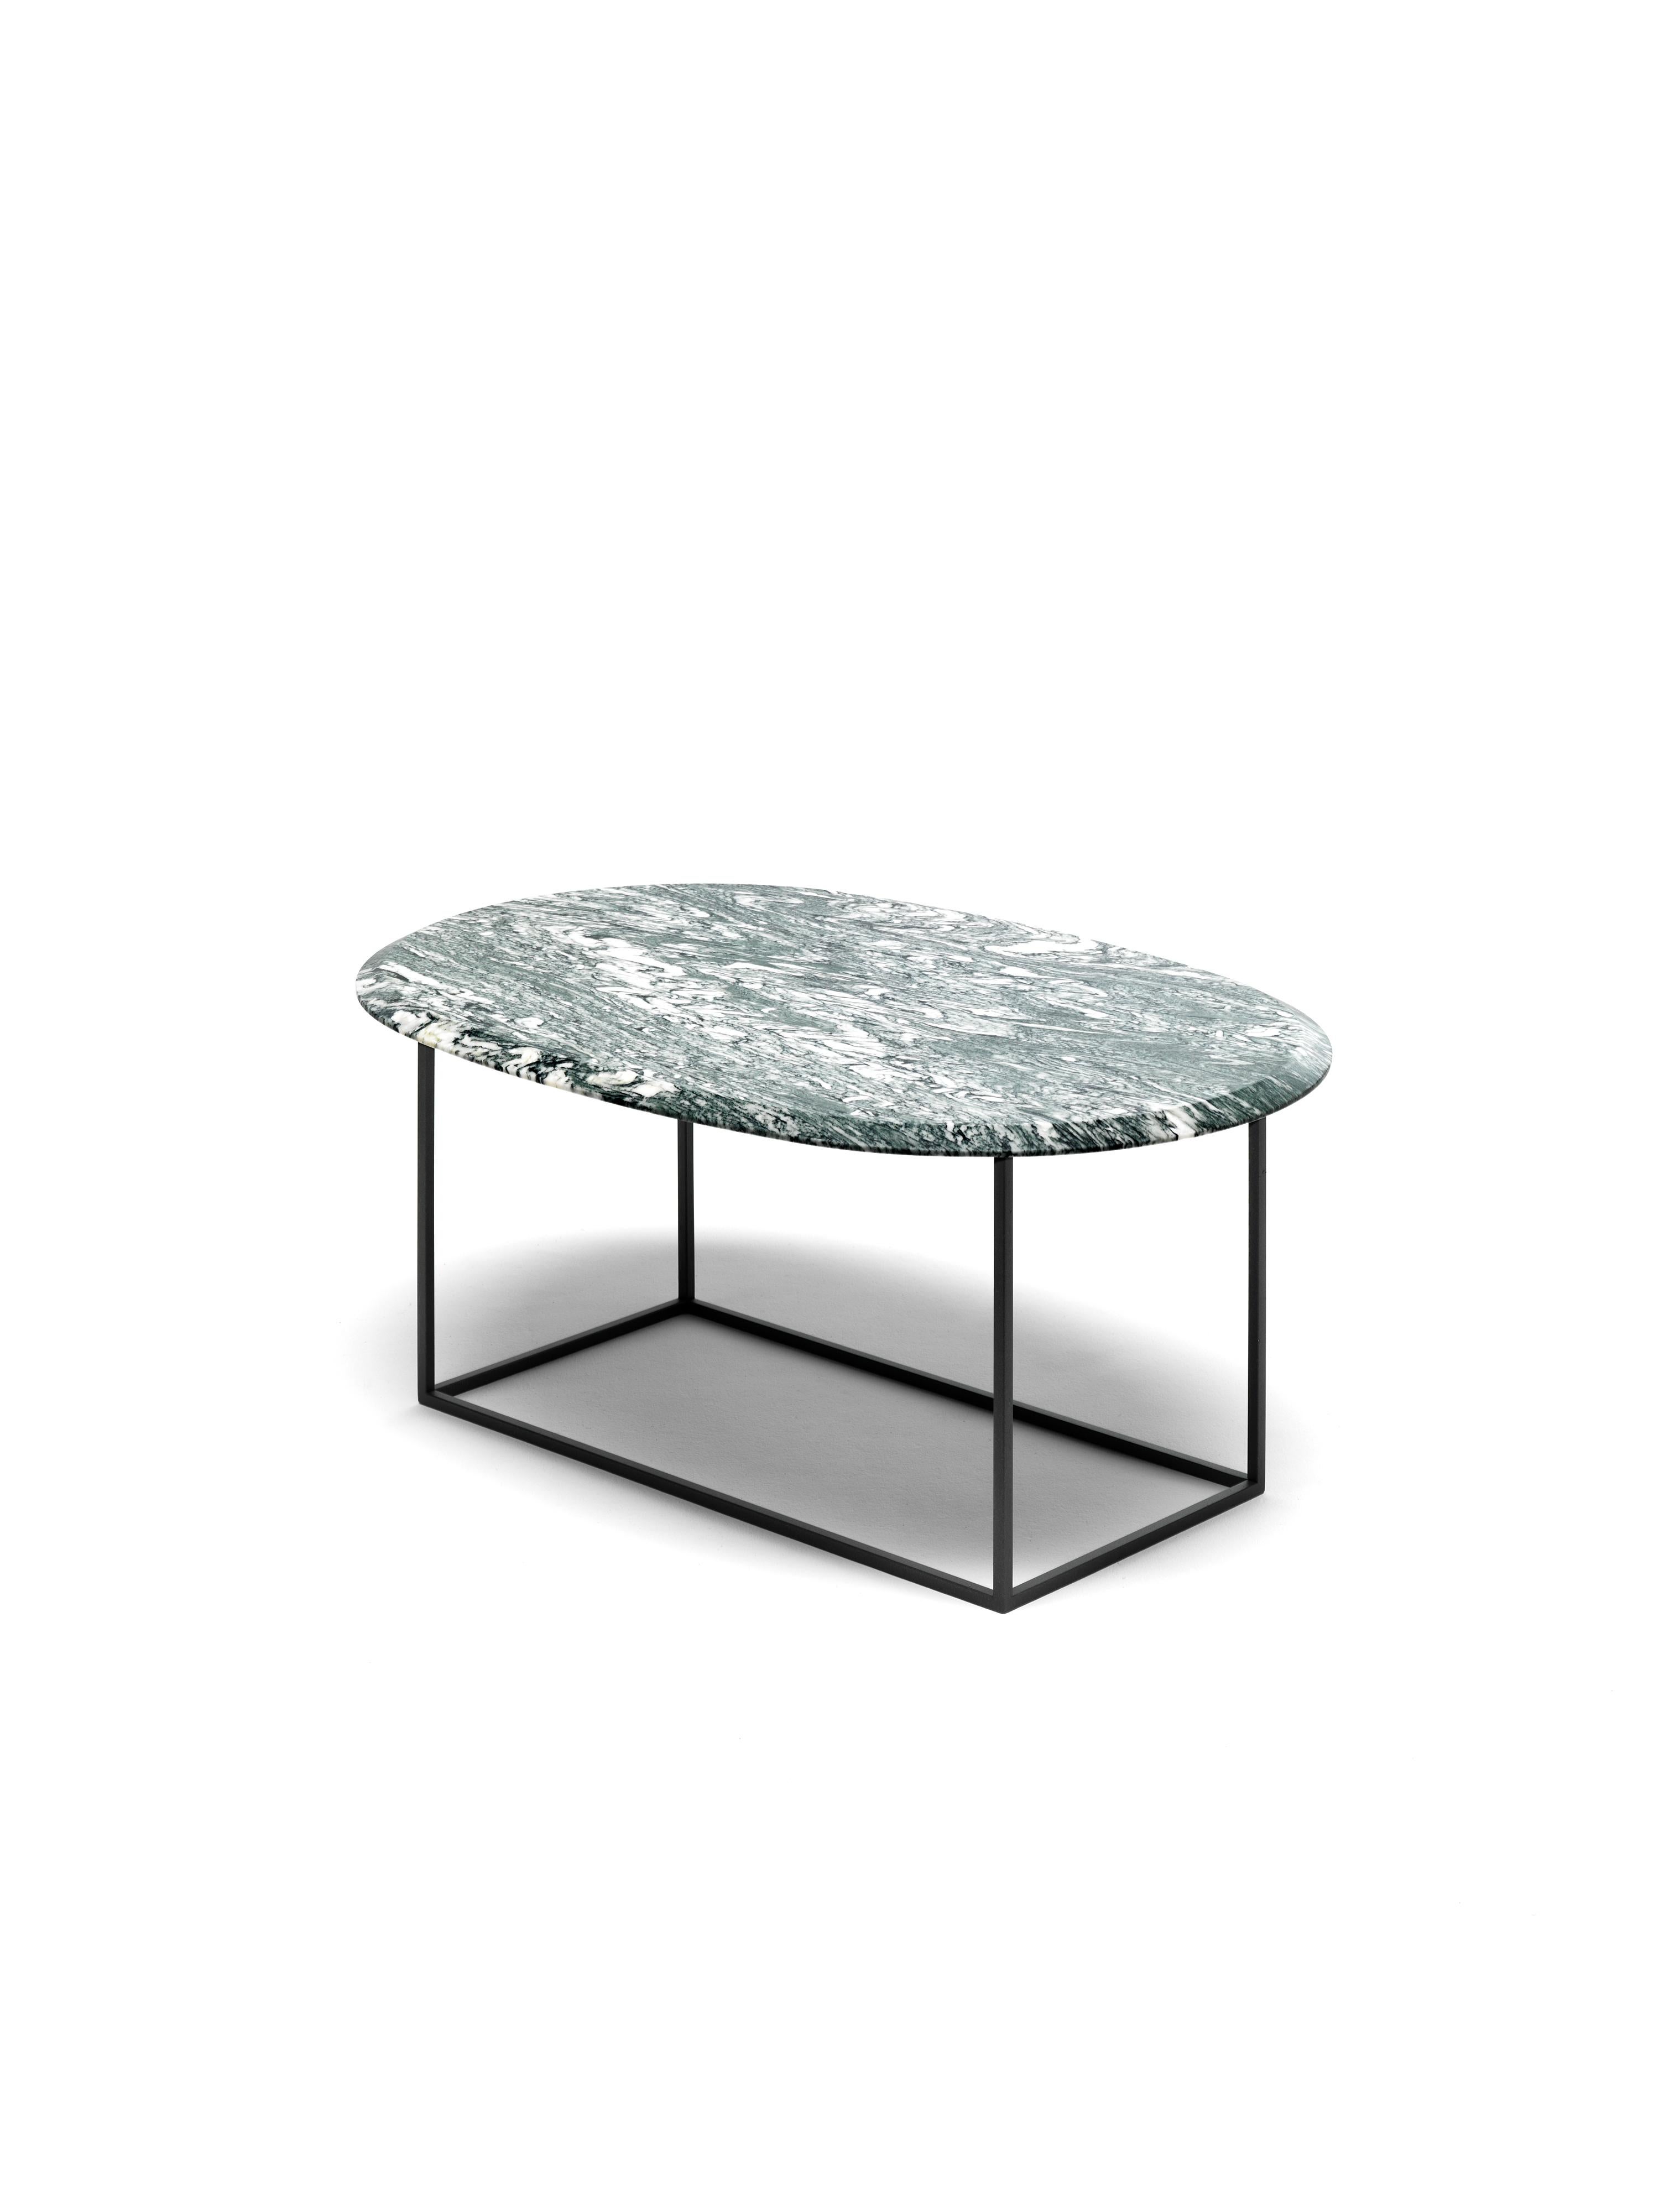 Our MT coffee table is at once simple and rich. The base is made with a very thin squared metal tubing which results in physically and visually light and clean geometric structure. The oval top is thick solid marble made visually lighter by a